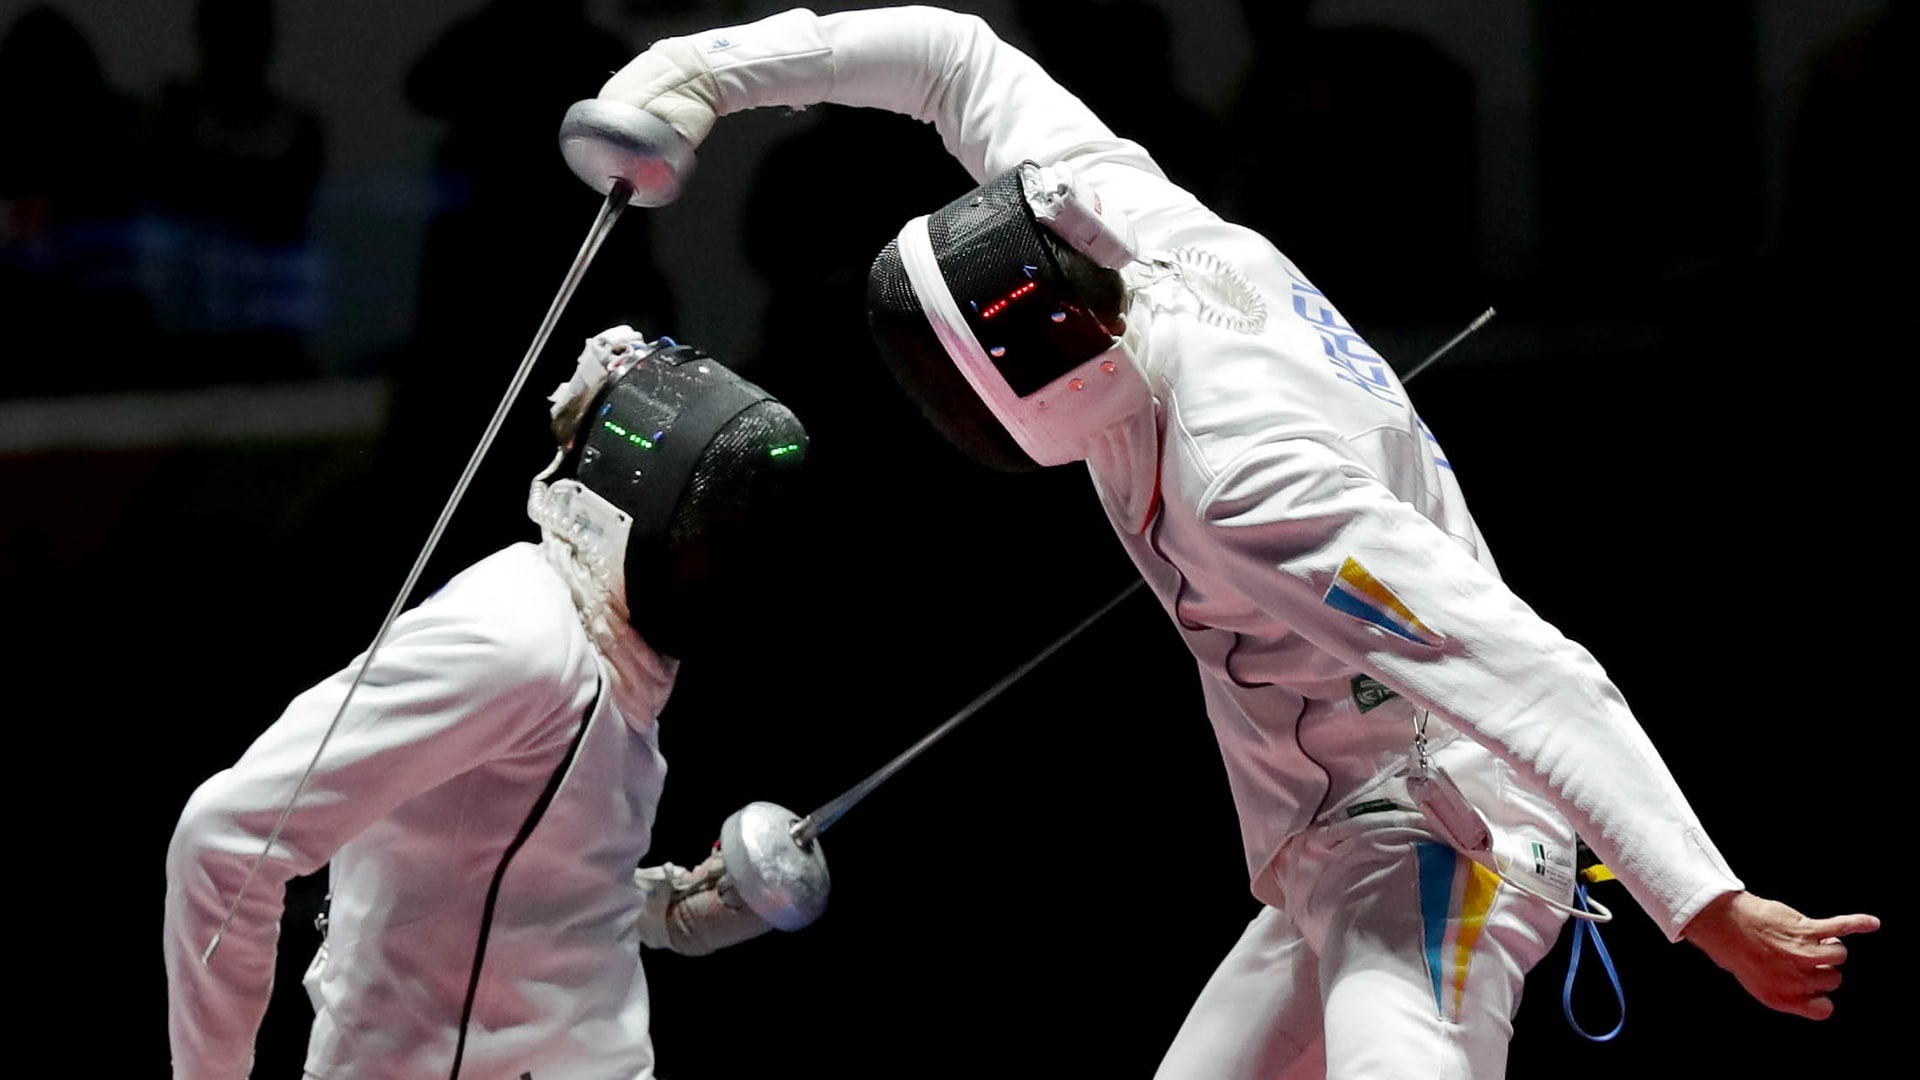 Fencing: Ukrainian foil fencer tries to escape a strike of his opponent, Competitive combat sport. 1920x1080 Full HD Wallpaper.